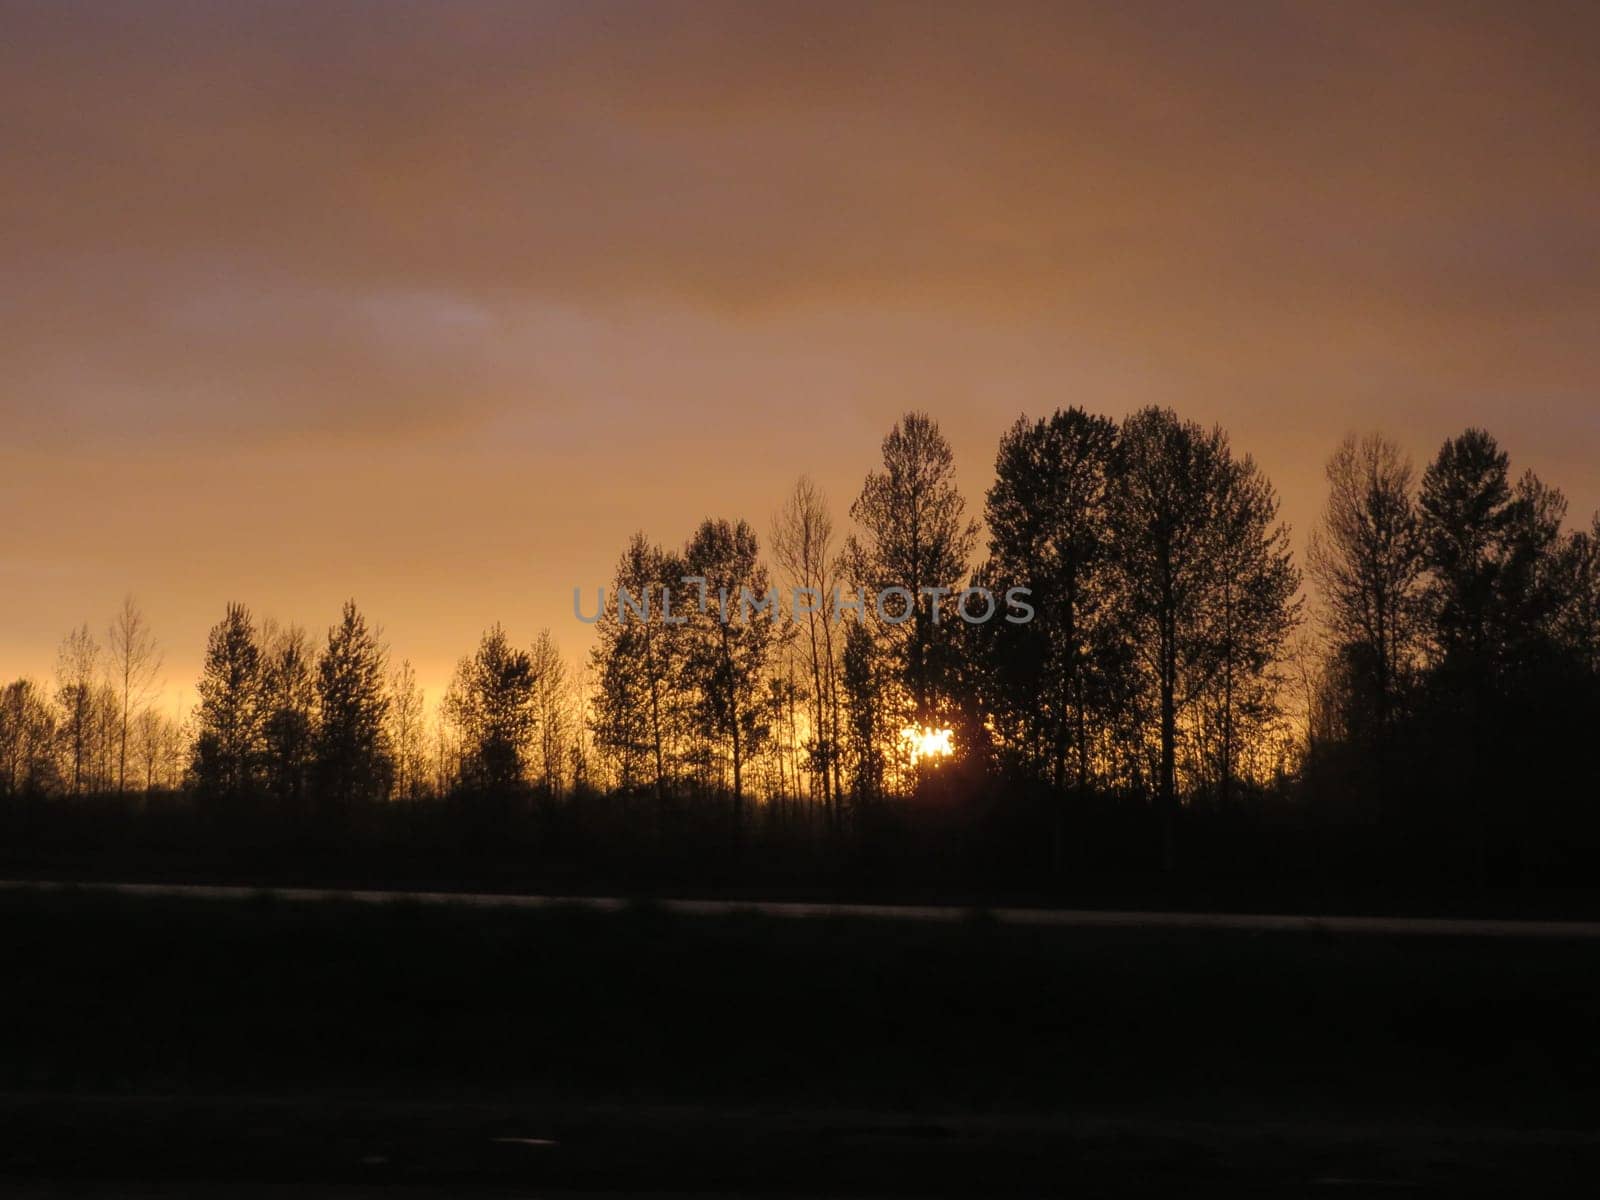 Fading Sunset along Oregon Freeway with Silhouette of Trees by grumblytumbleweed